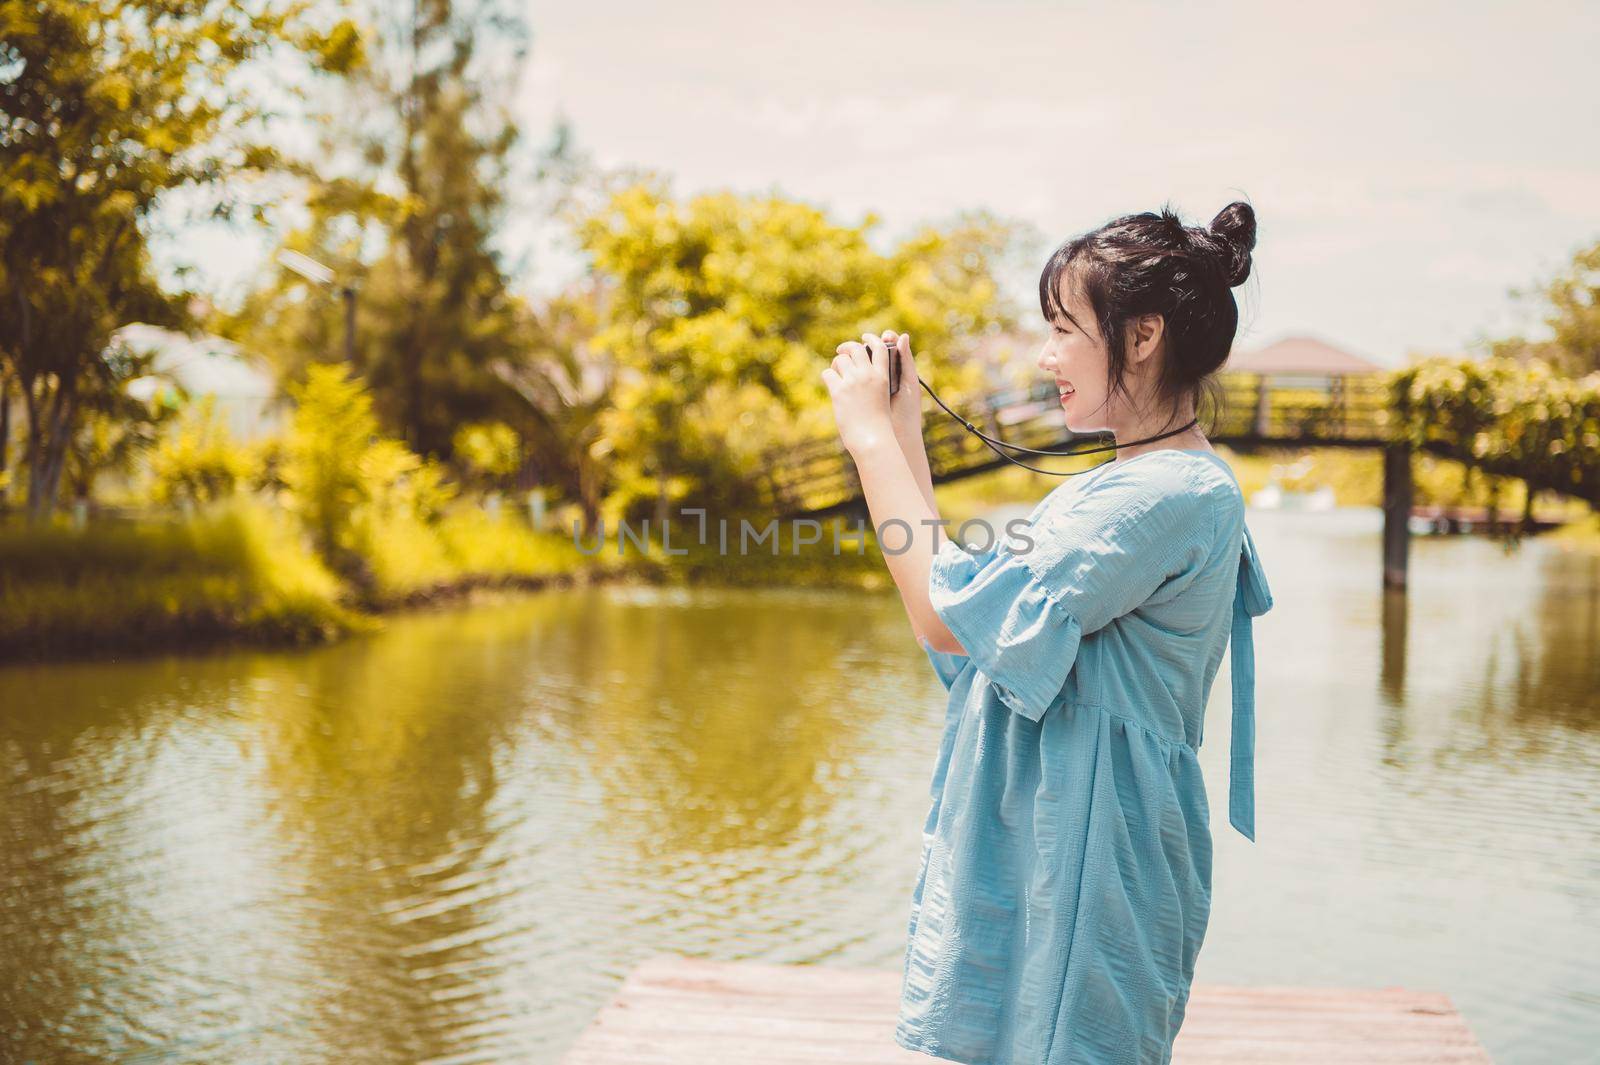 Asian woman in blue dress in public park carrying digital mirrorless camera and taking photo without facial mask in happy mood. People lifestyle and leisure concept. Outdoor travel and Nature theme. by MiniStocker